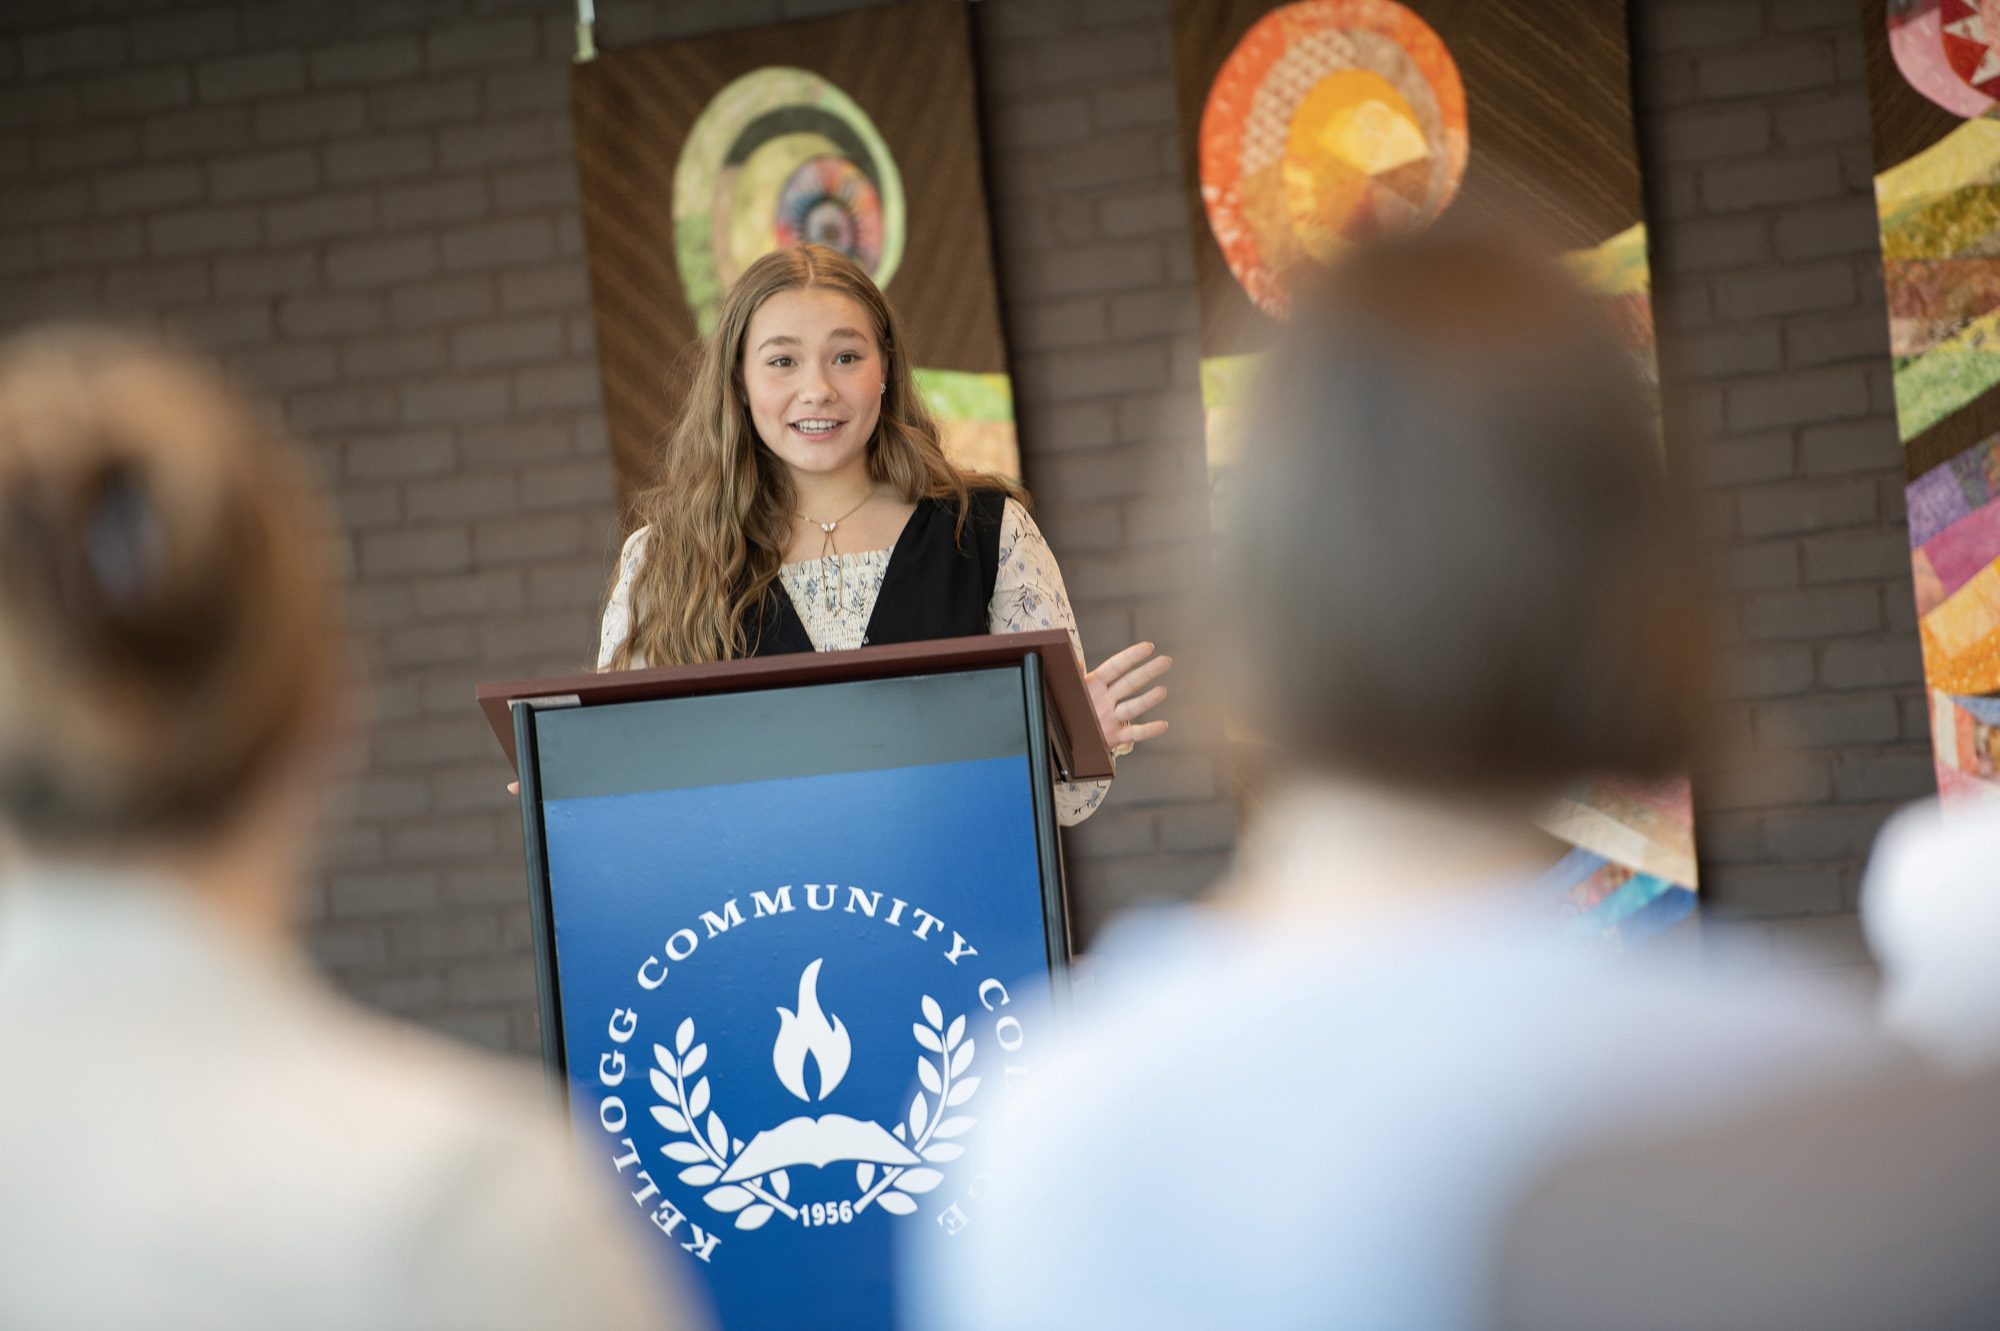 A student speaks at a podium during an event.